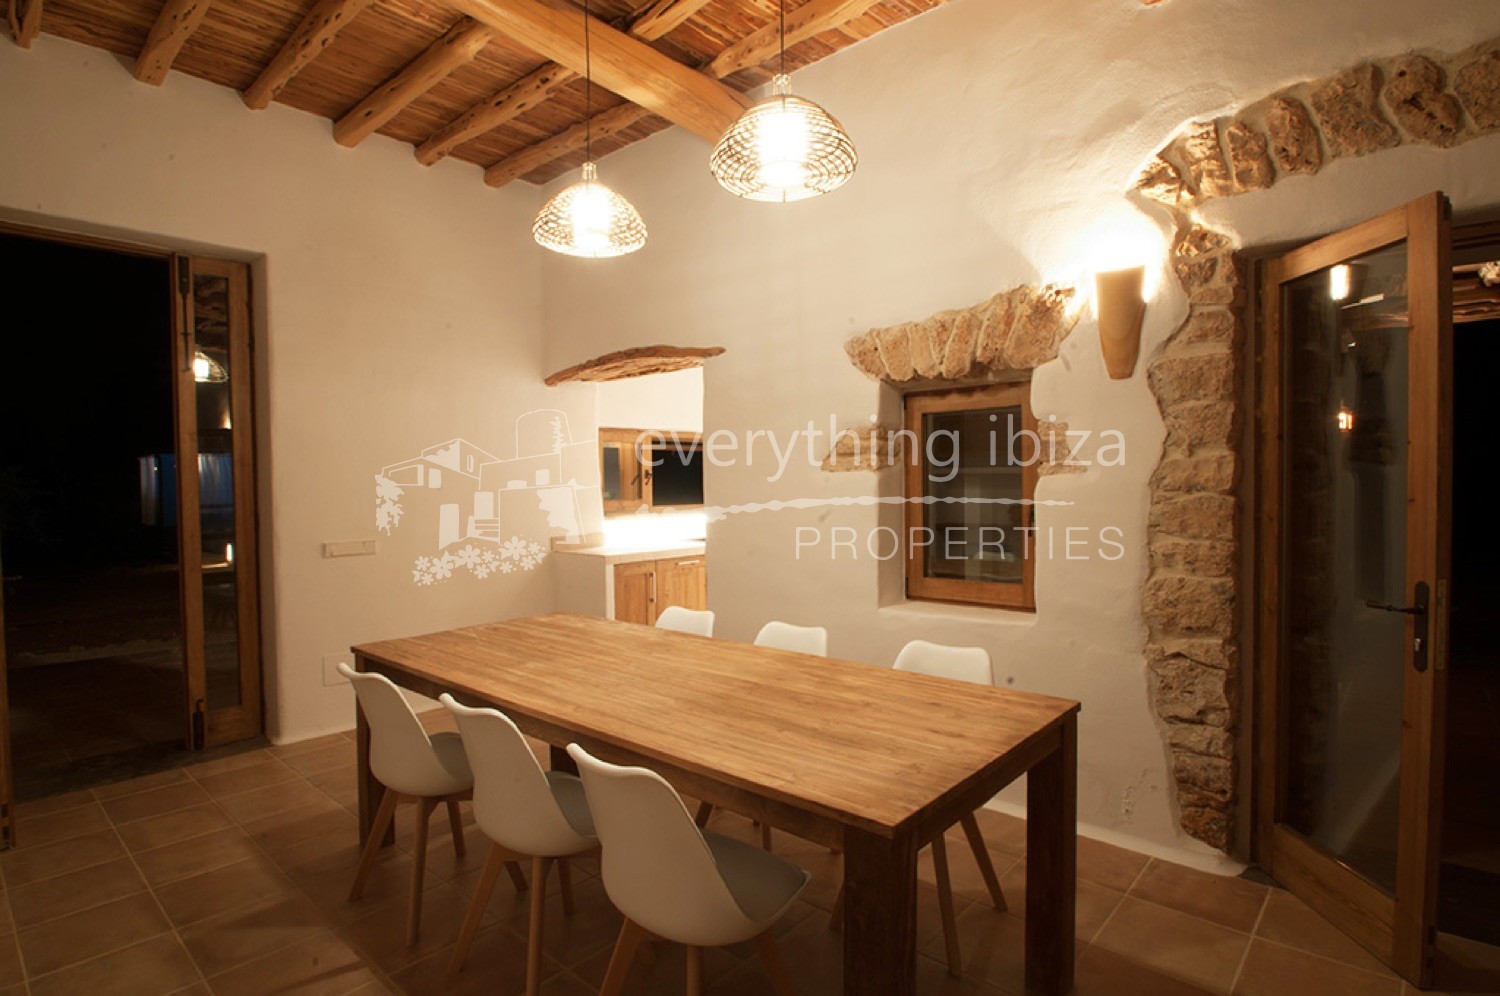 Beautifully Styled Ibiza Villa, ref. 1294, for sale in Ibiza by everything ibiza Properties